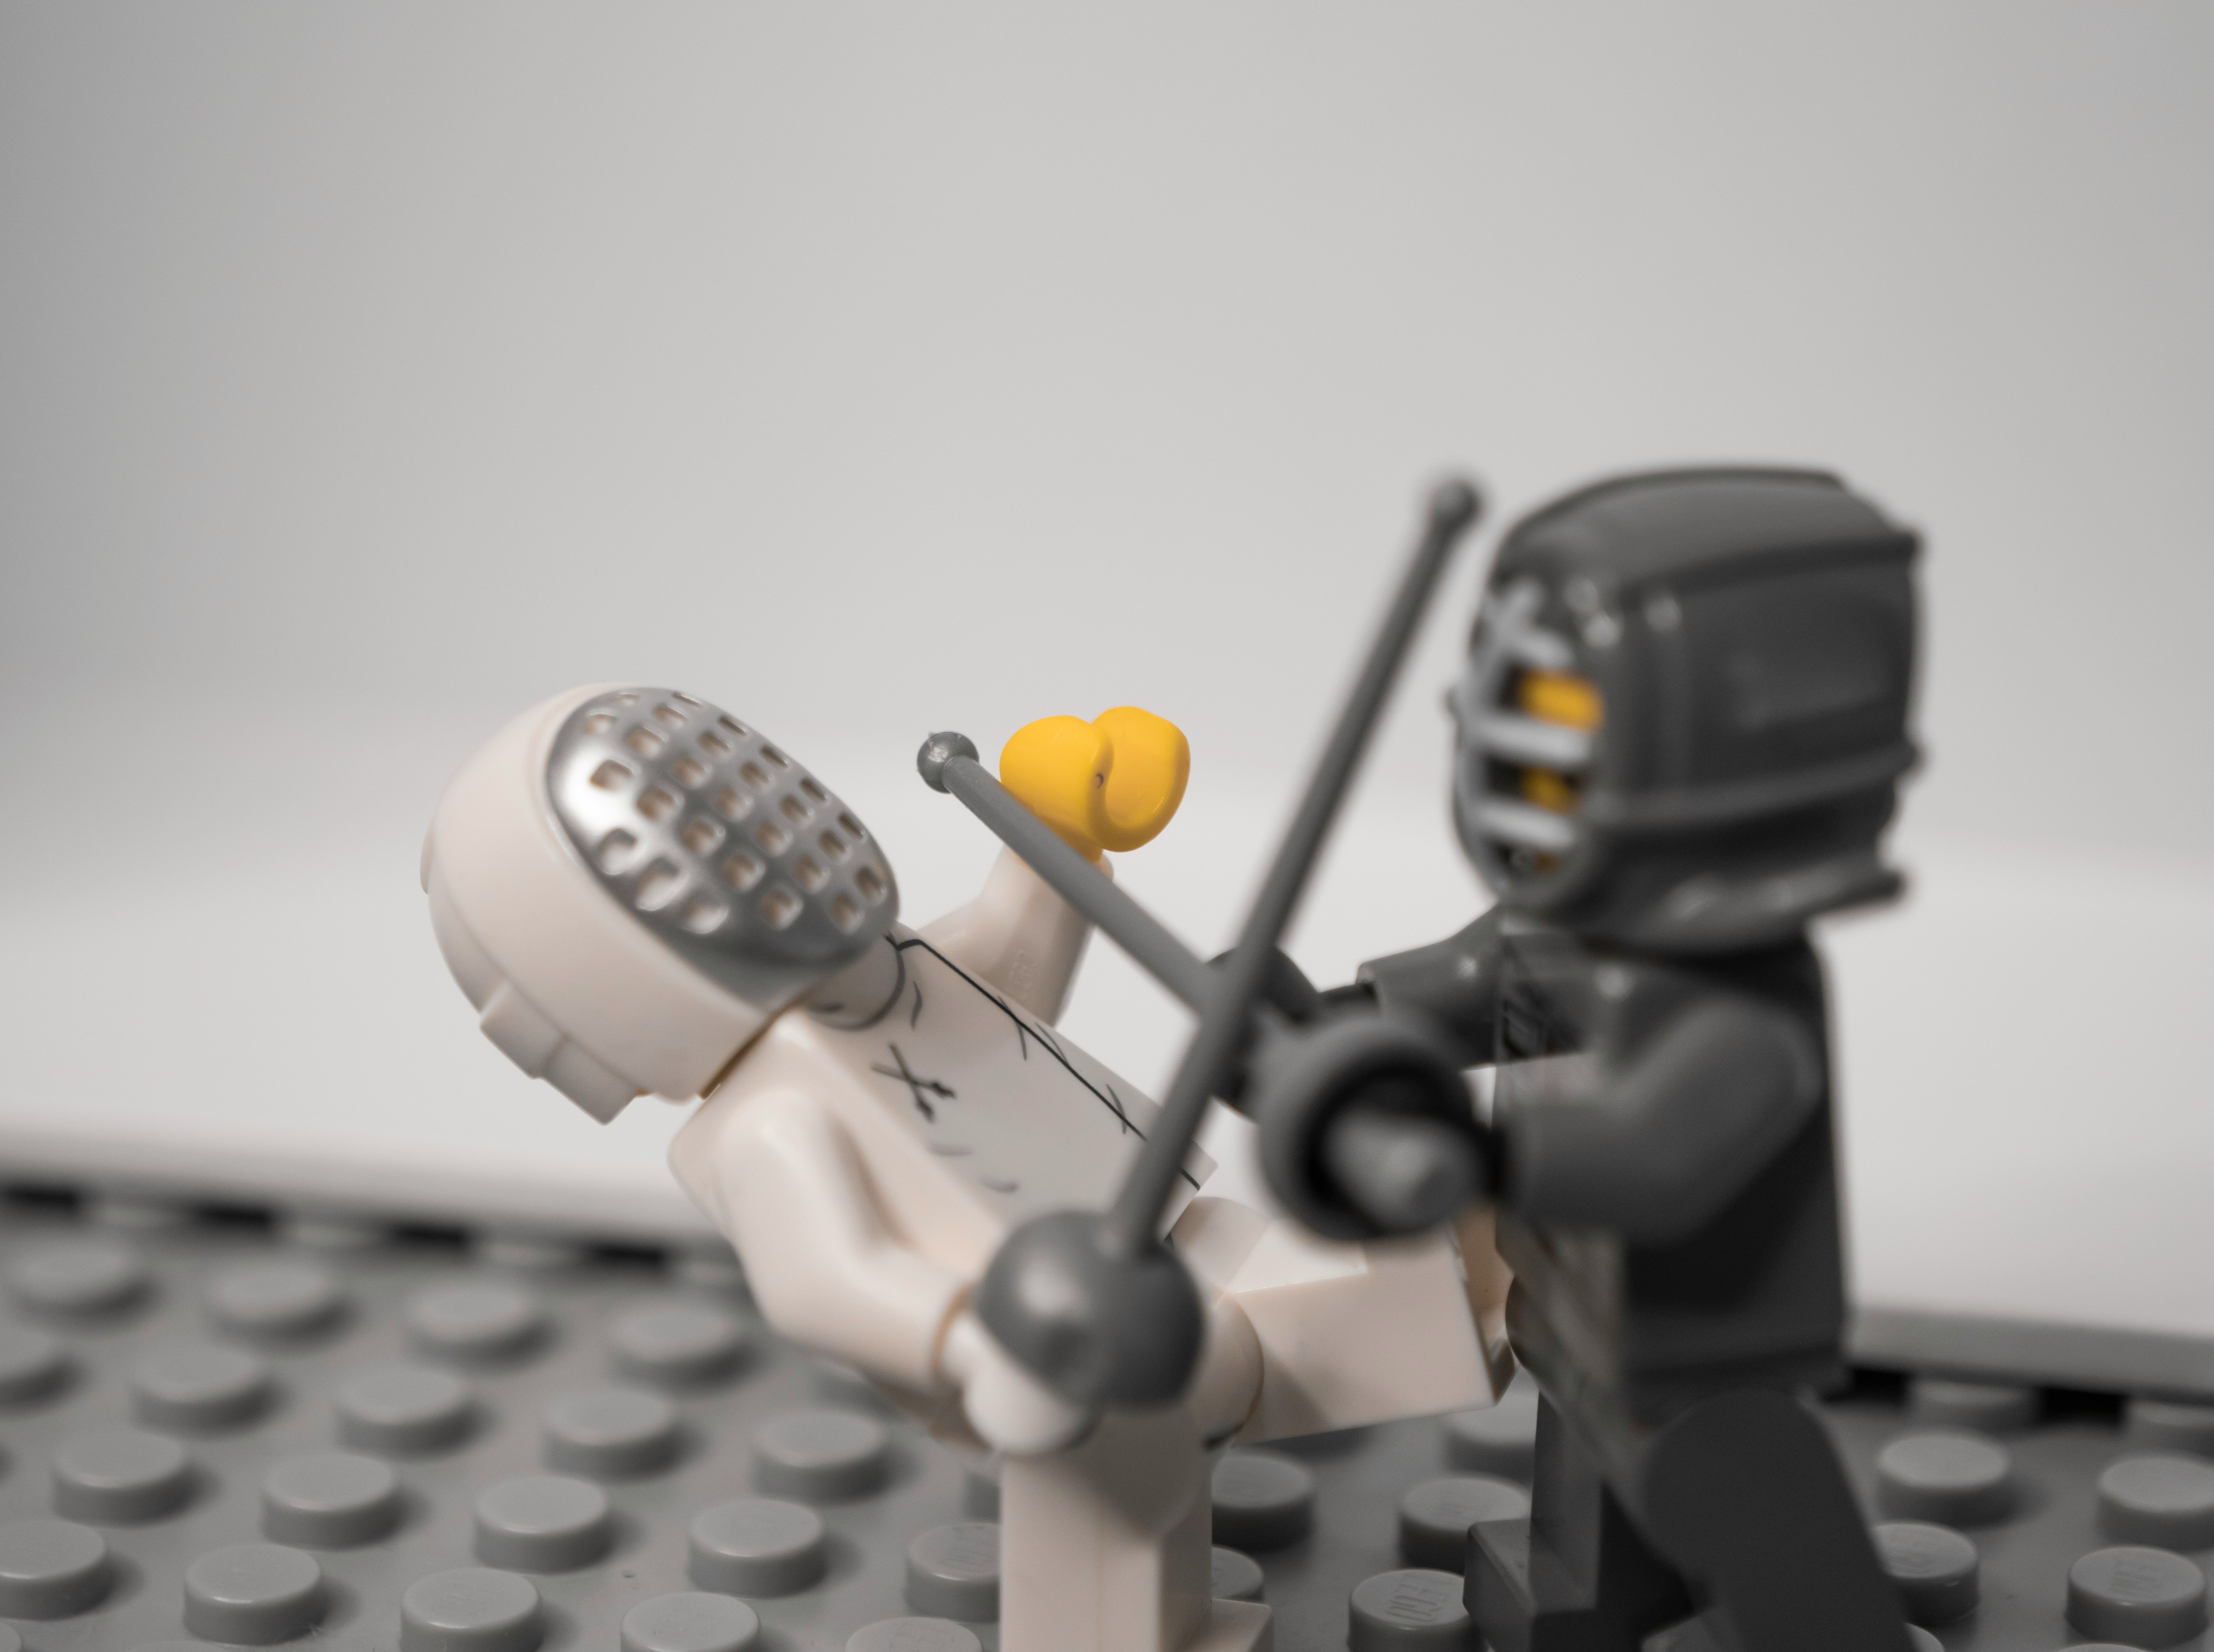 Fencer Lego figures fighting with swords